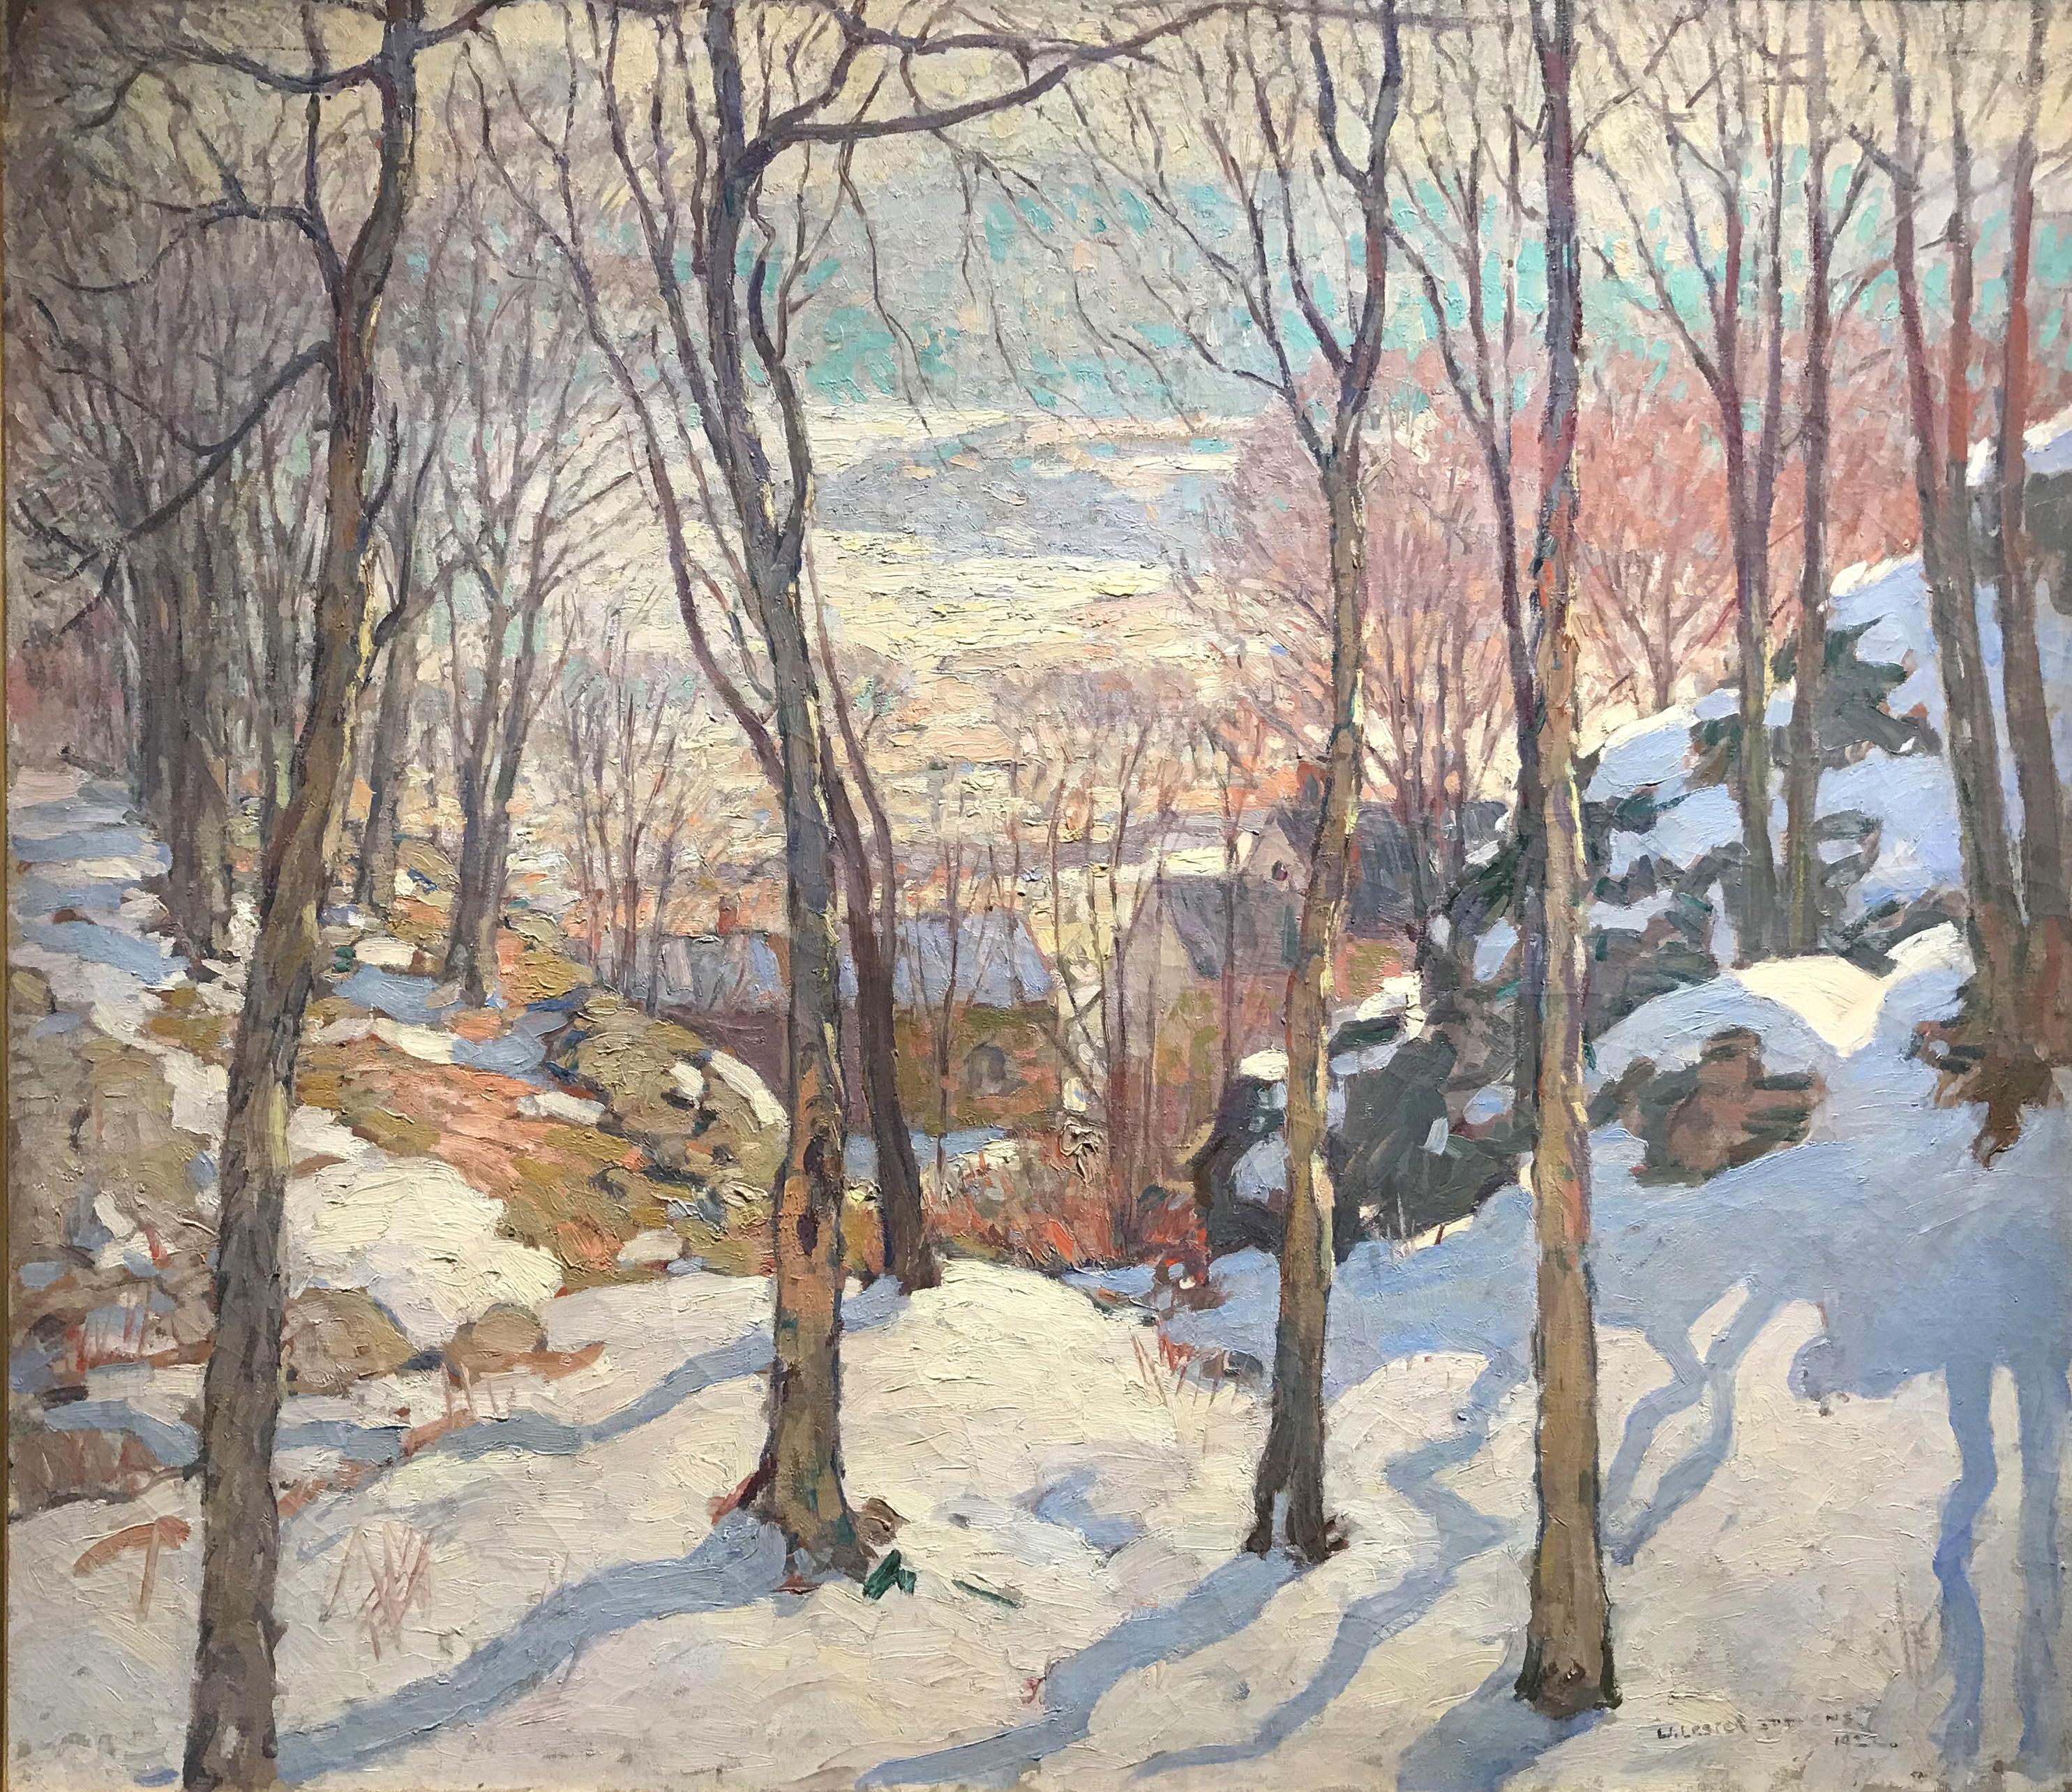 Rockport In Winter - Painting by William Lester Stevens